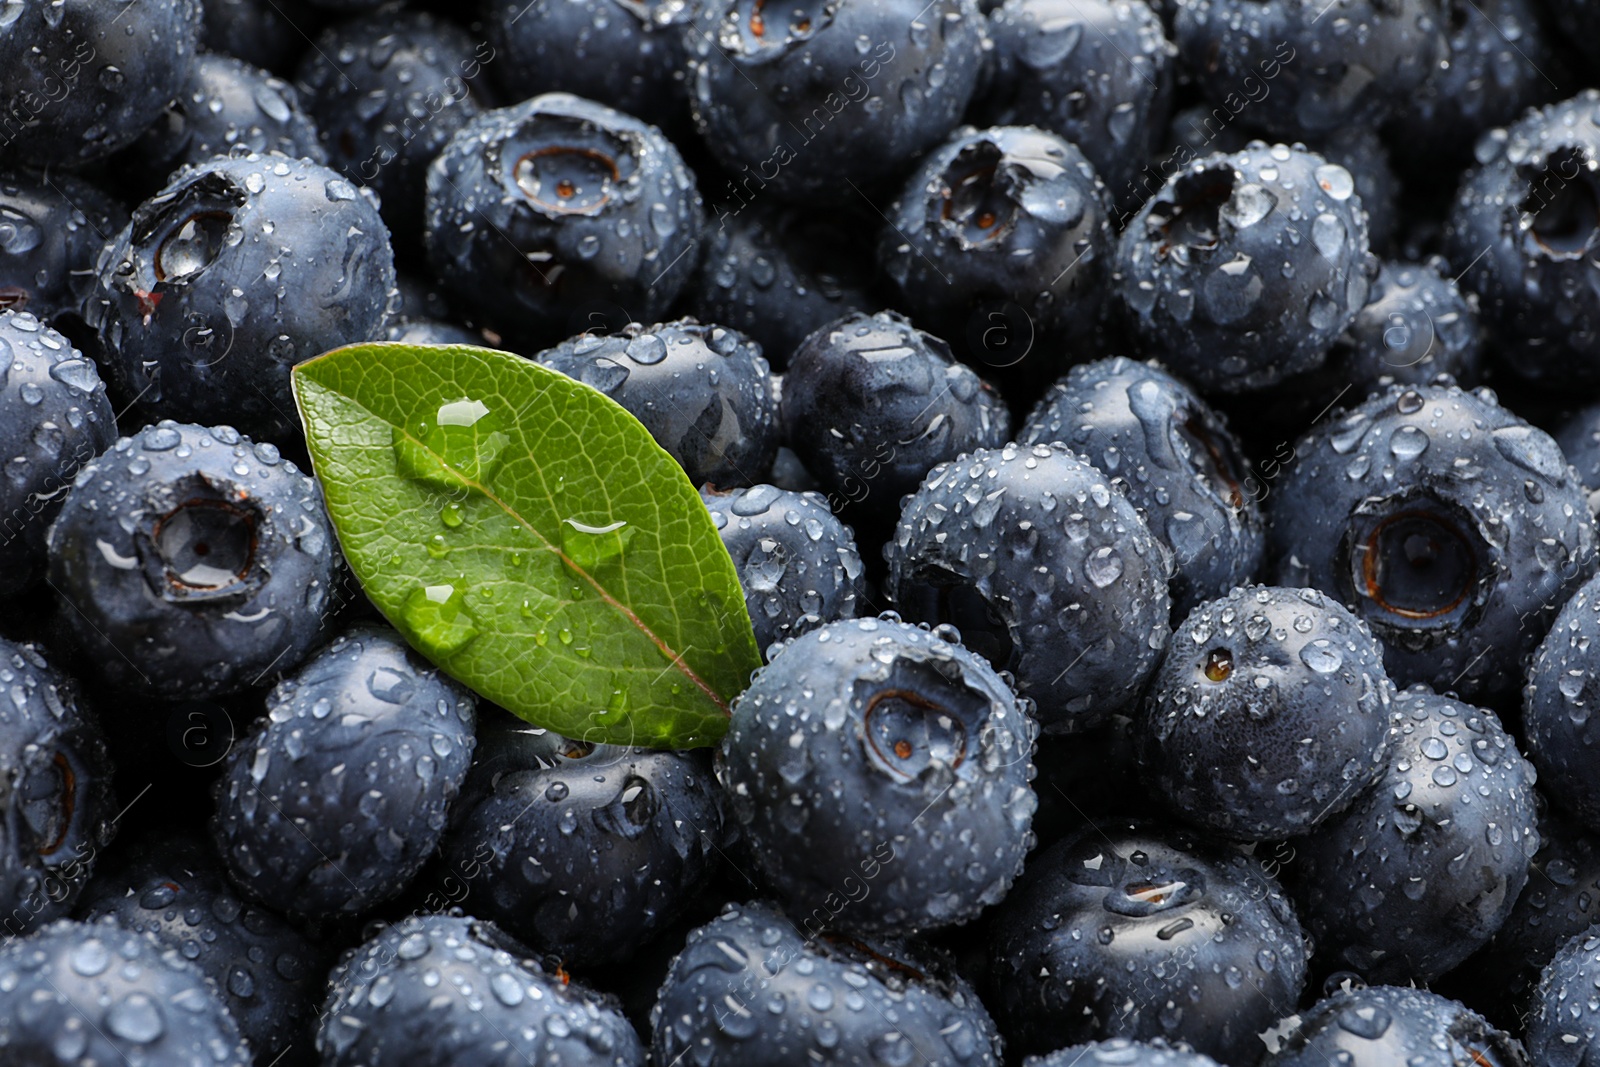 Photo of Wet fresh blueberries with green leaf as background, closeup view